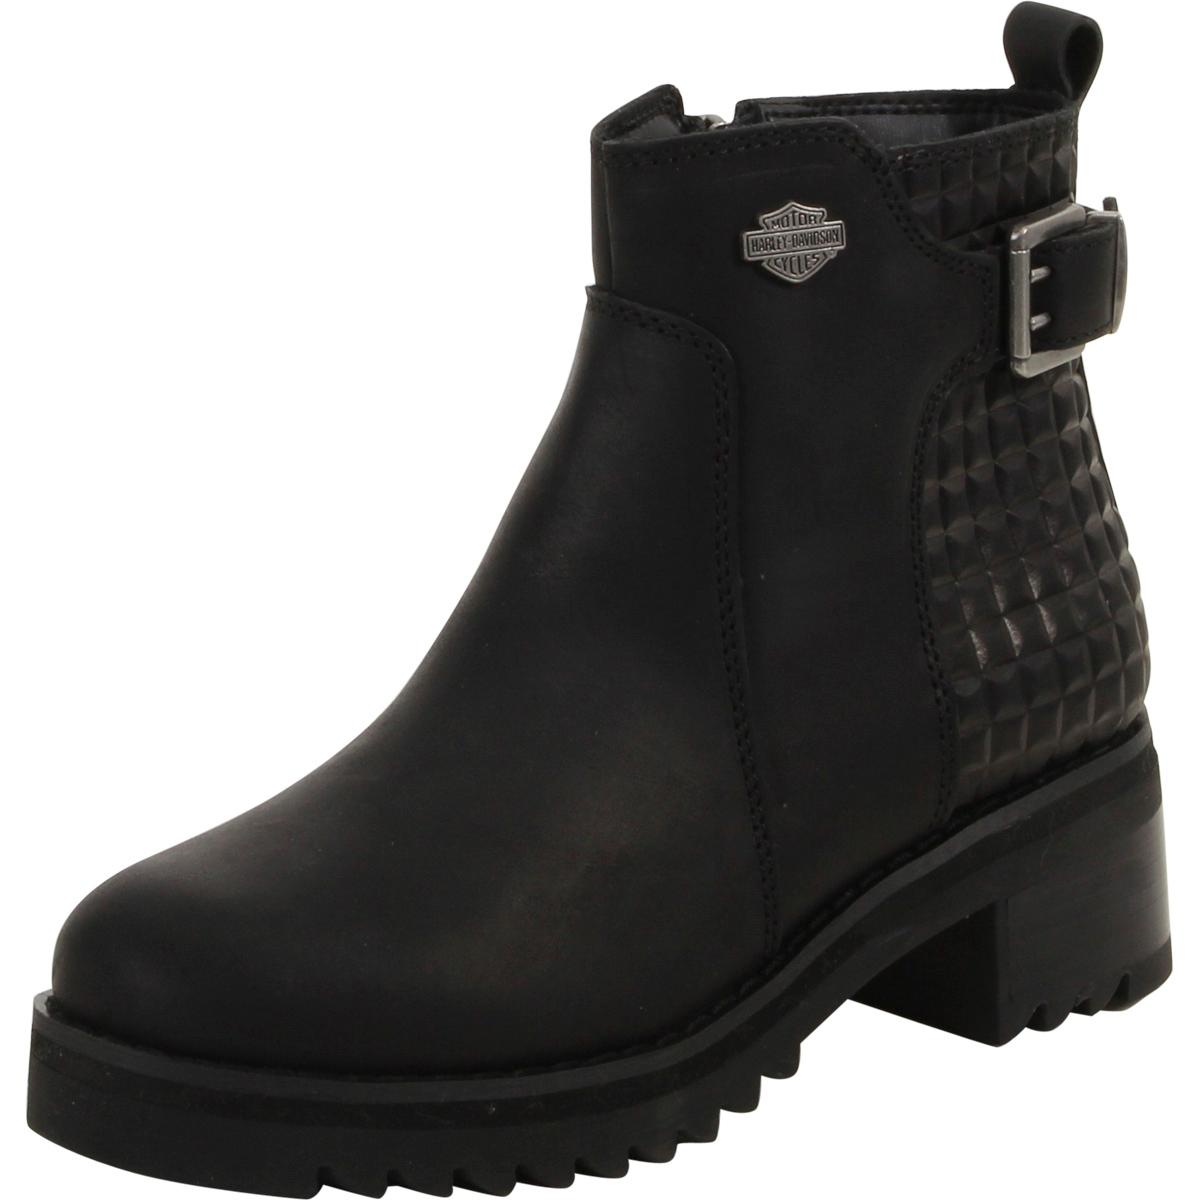 Harley Davidson Women's Kelso Textured Ankle Boots Shoes - Black - 8 D(M) US